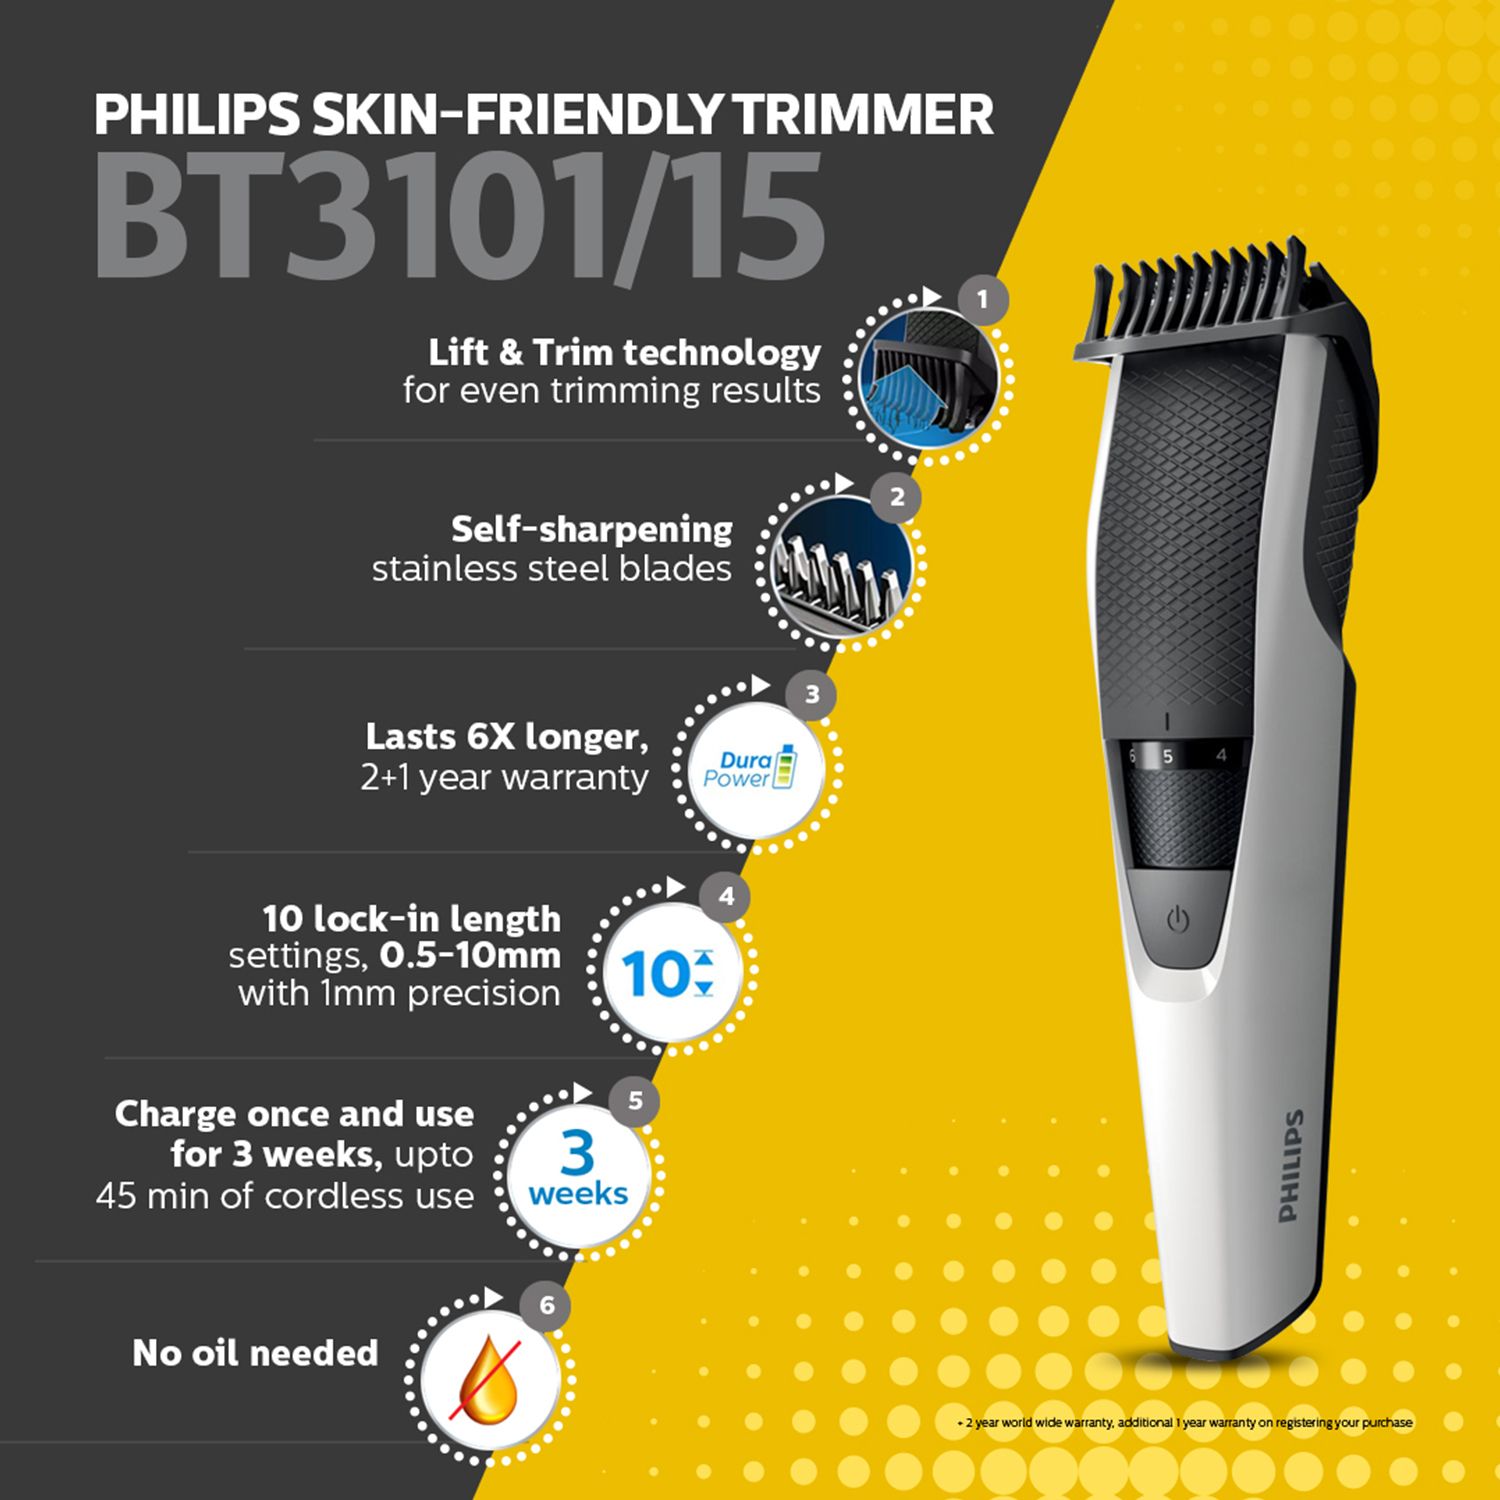  Buy Philips BT3101/15 Trimmer-45 min Runtime 10 Length Settings  online in India on Foxy. Free shipping, watch expert reviews.